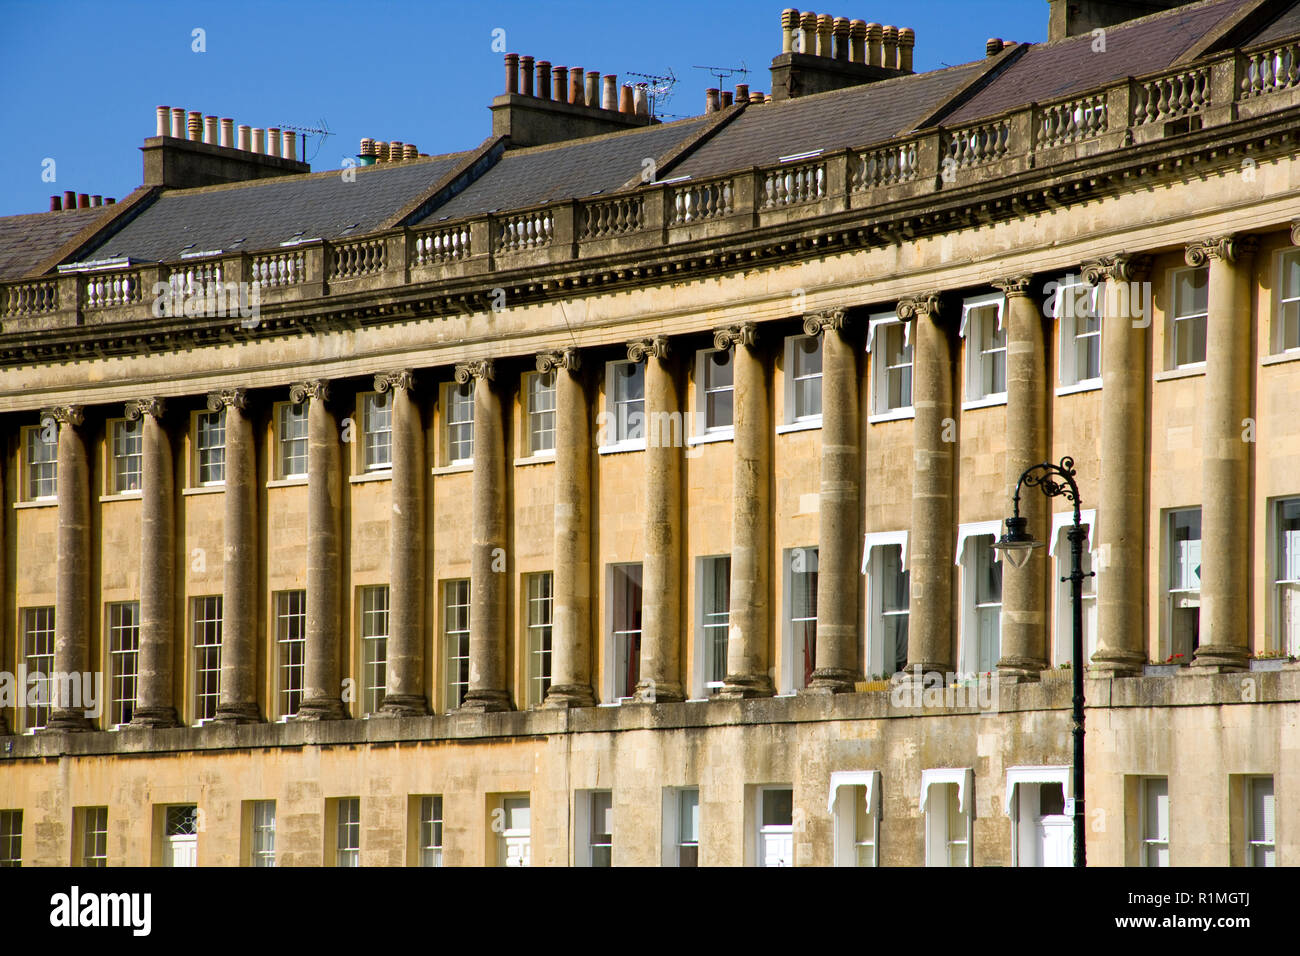 UK, England, Somerset, Bath, World Heritage City, historic terraced houses pattern in The Royal Crescent Stock Photo